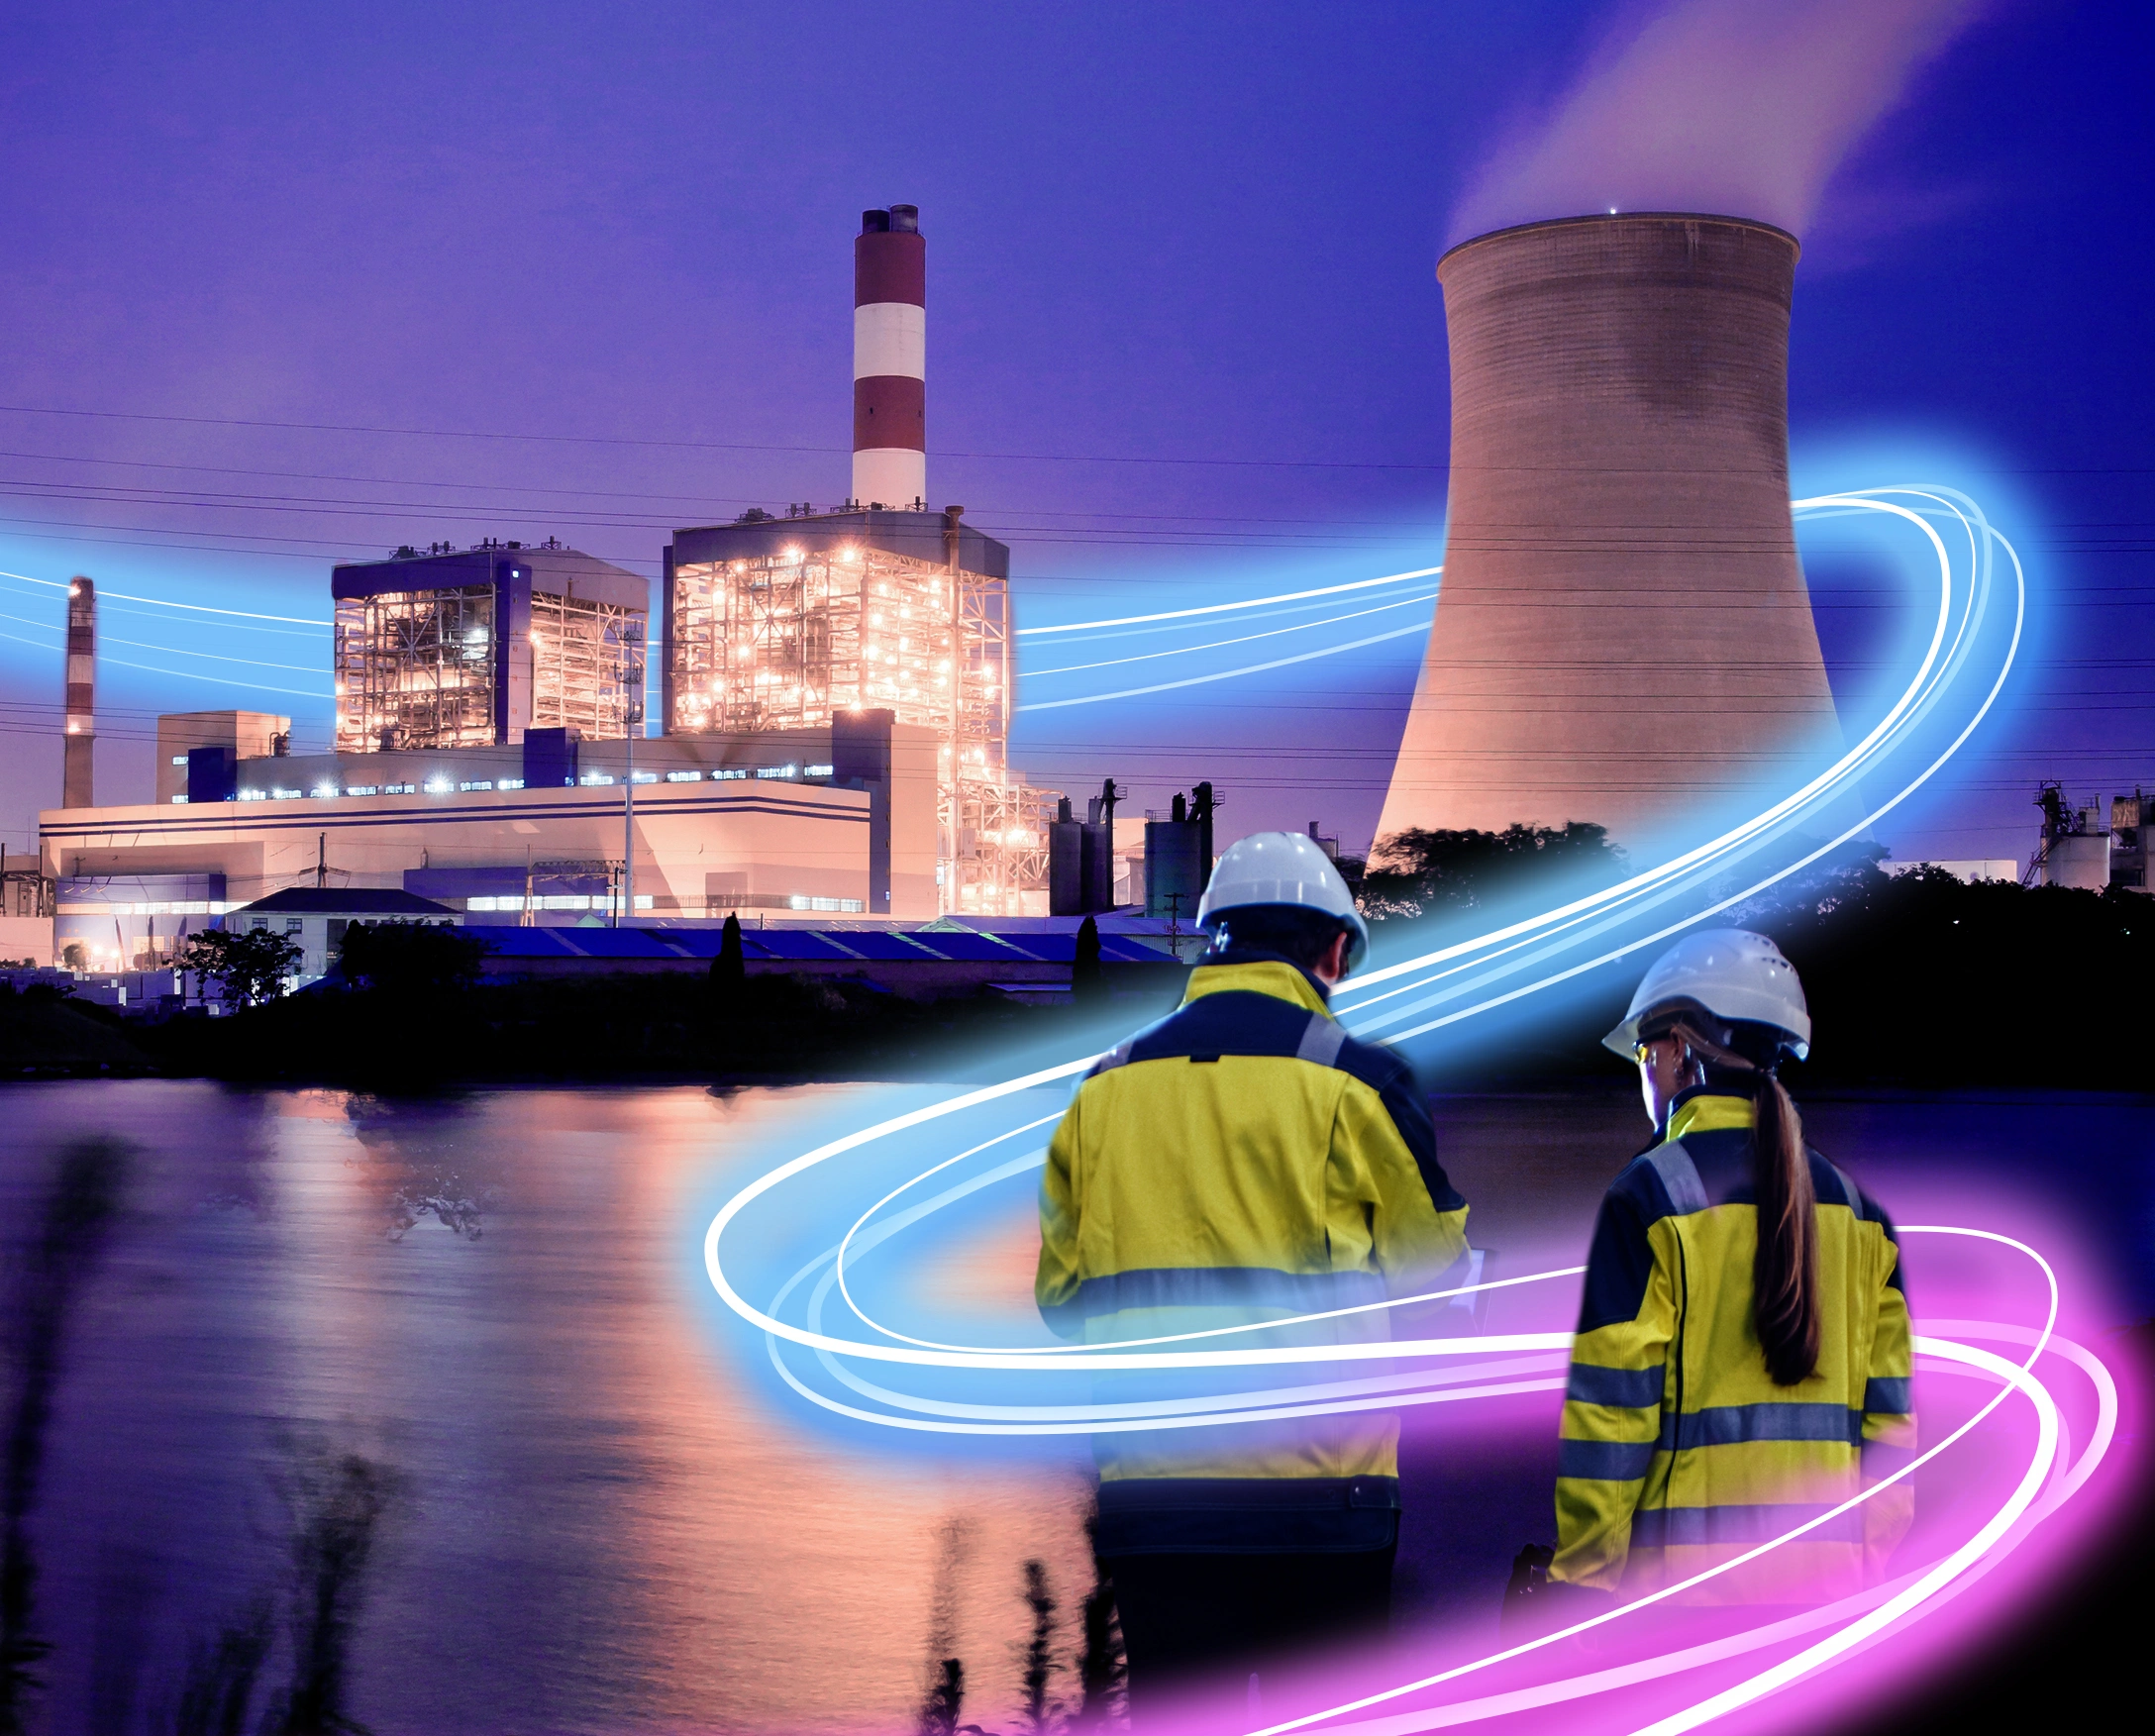 Collaboration and innovation in the power sector